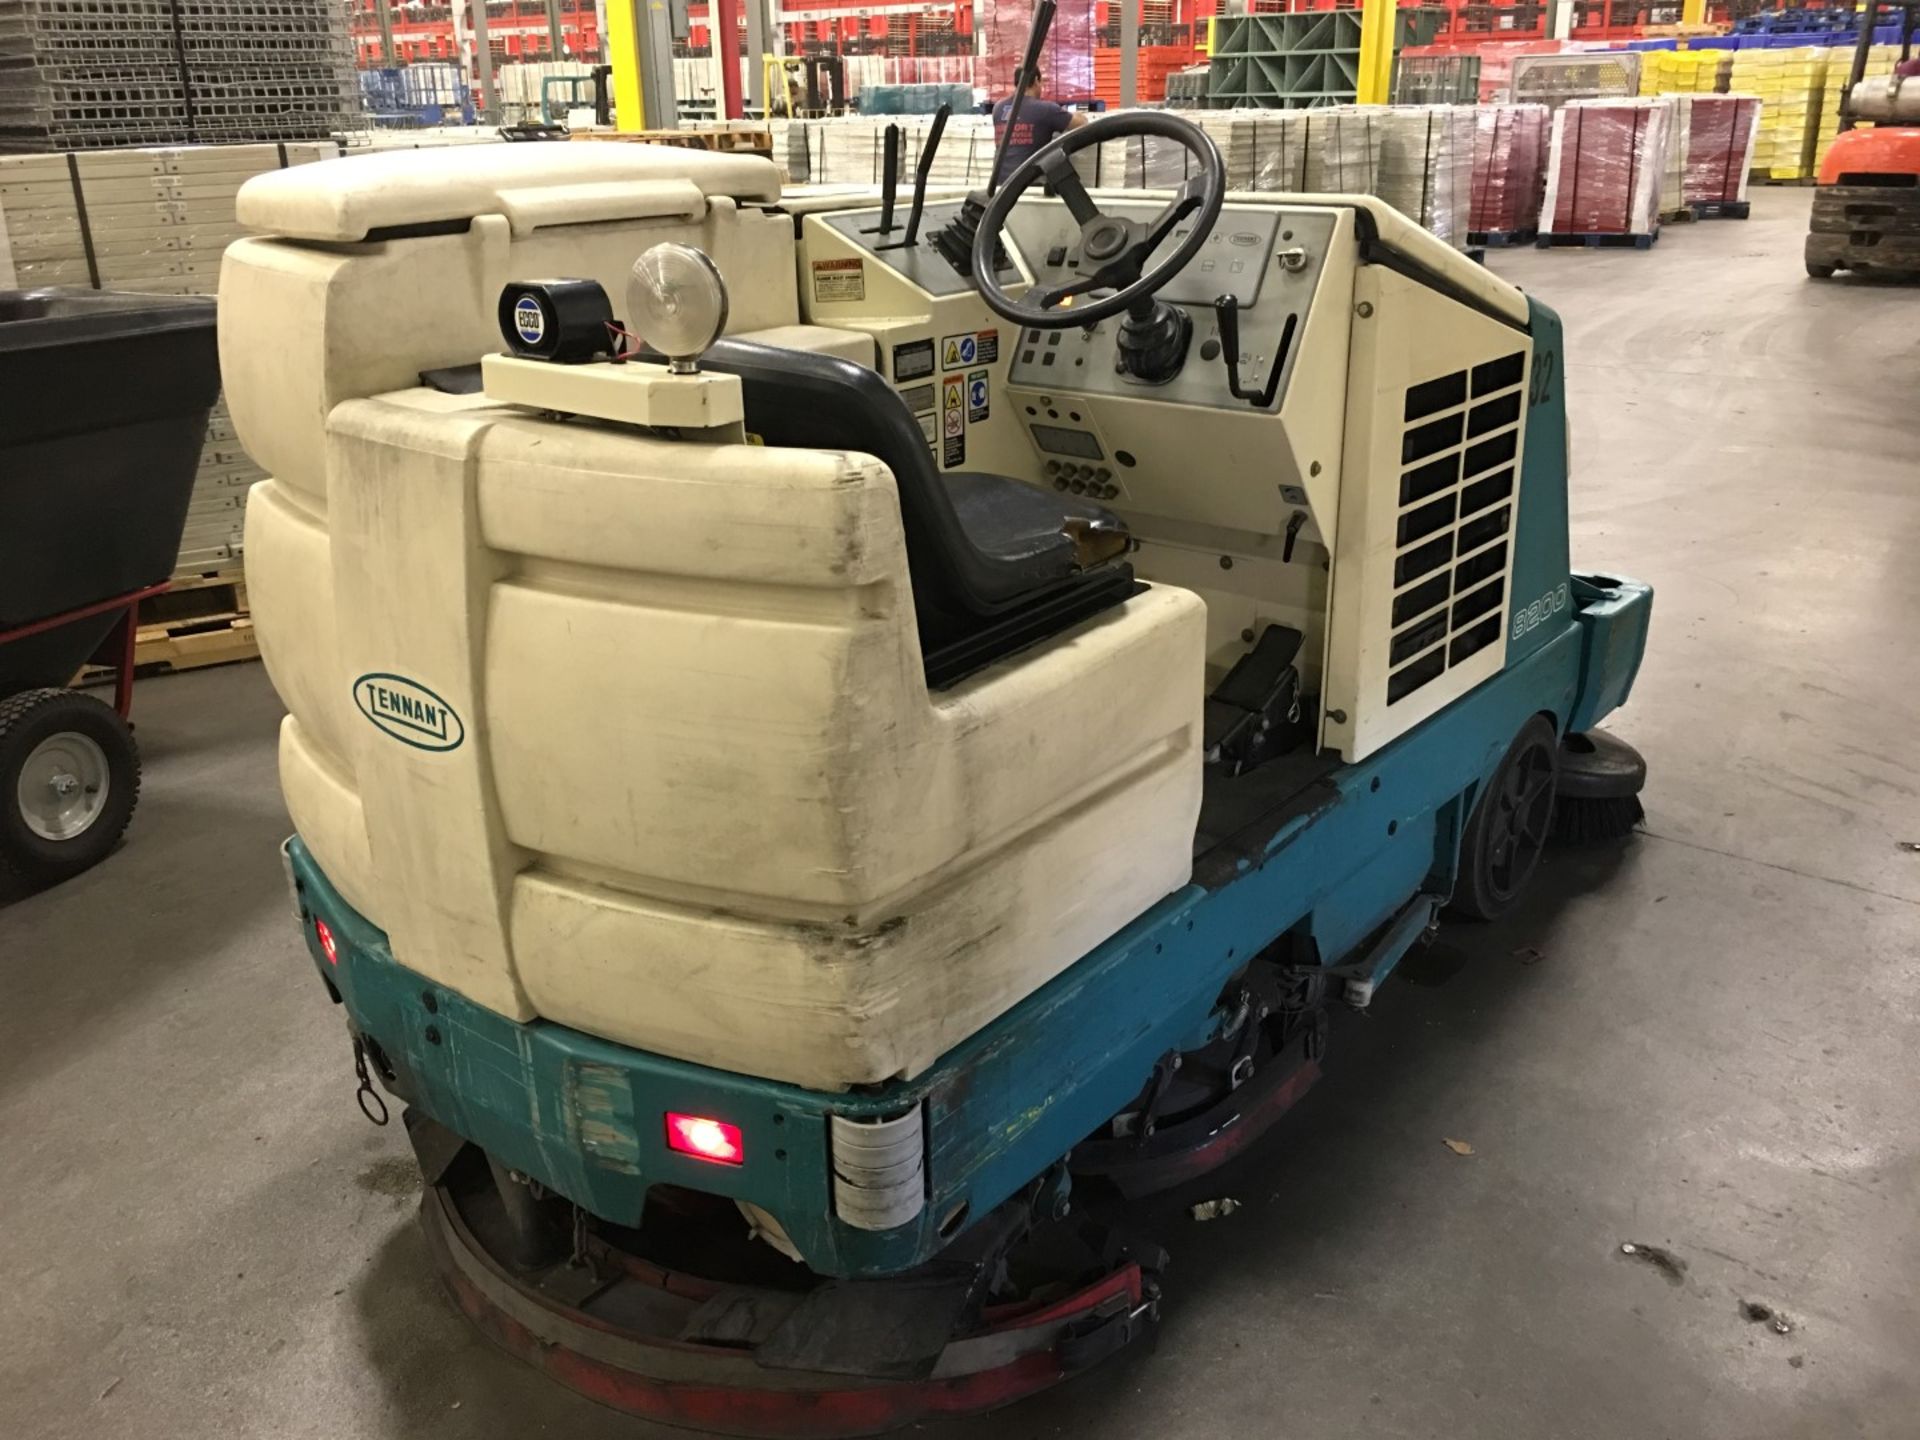 2001 TENNANT 8200 COMBINATION RIDER FLOOR SWEEPER SCRUBBER, LP GAS POWERED (WATCH VIDEO) - Image 2 of 6